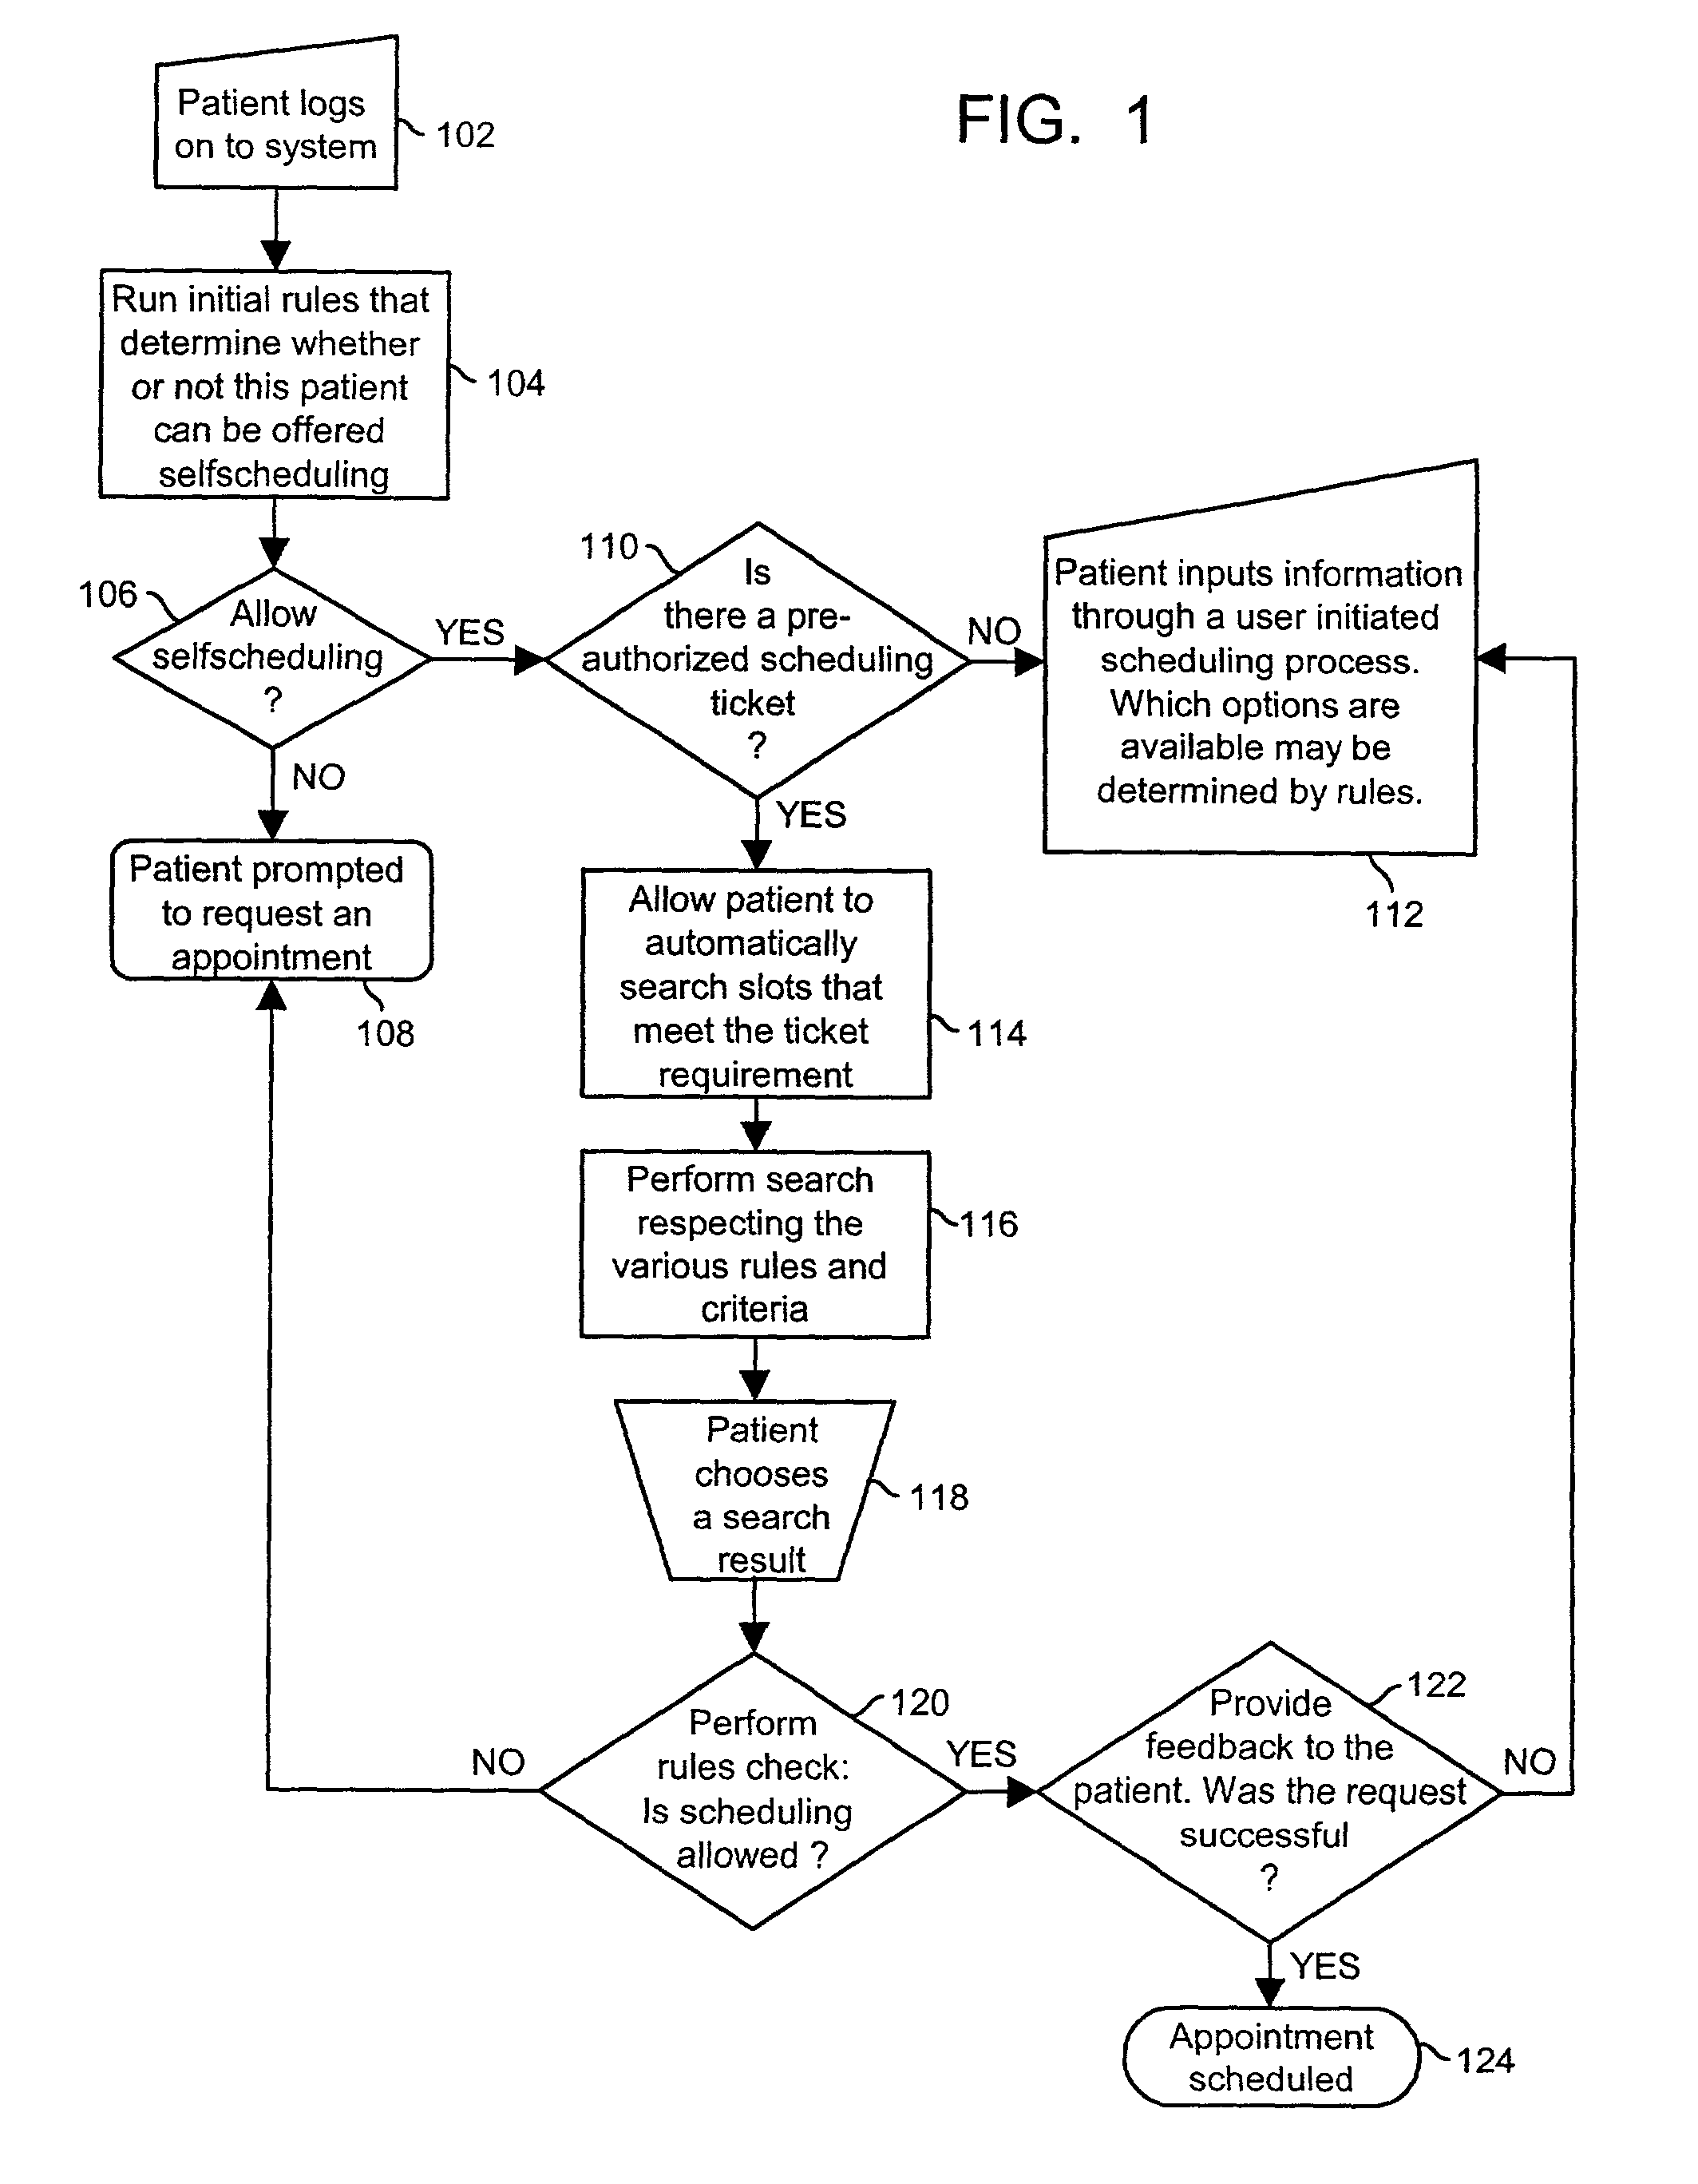 Rules based ticketing for self-scheduling of appointments